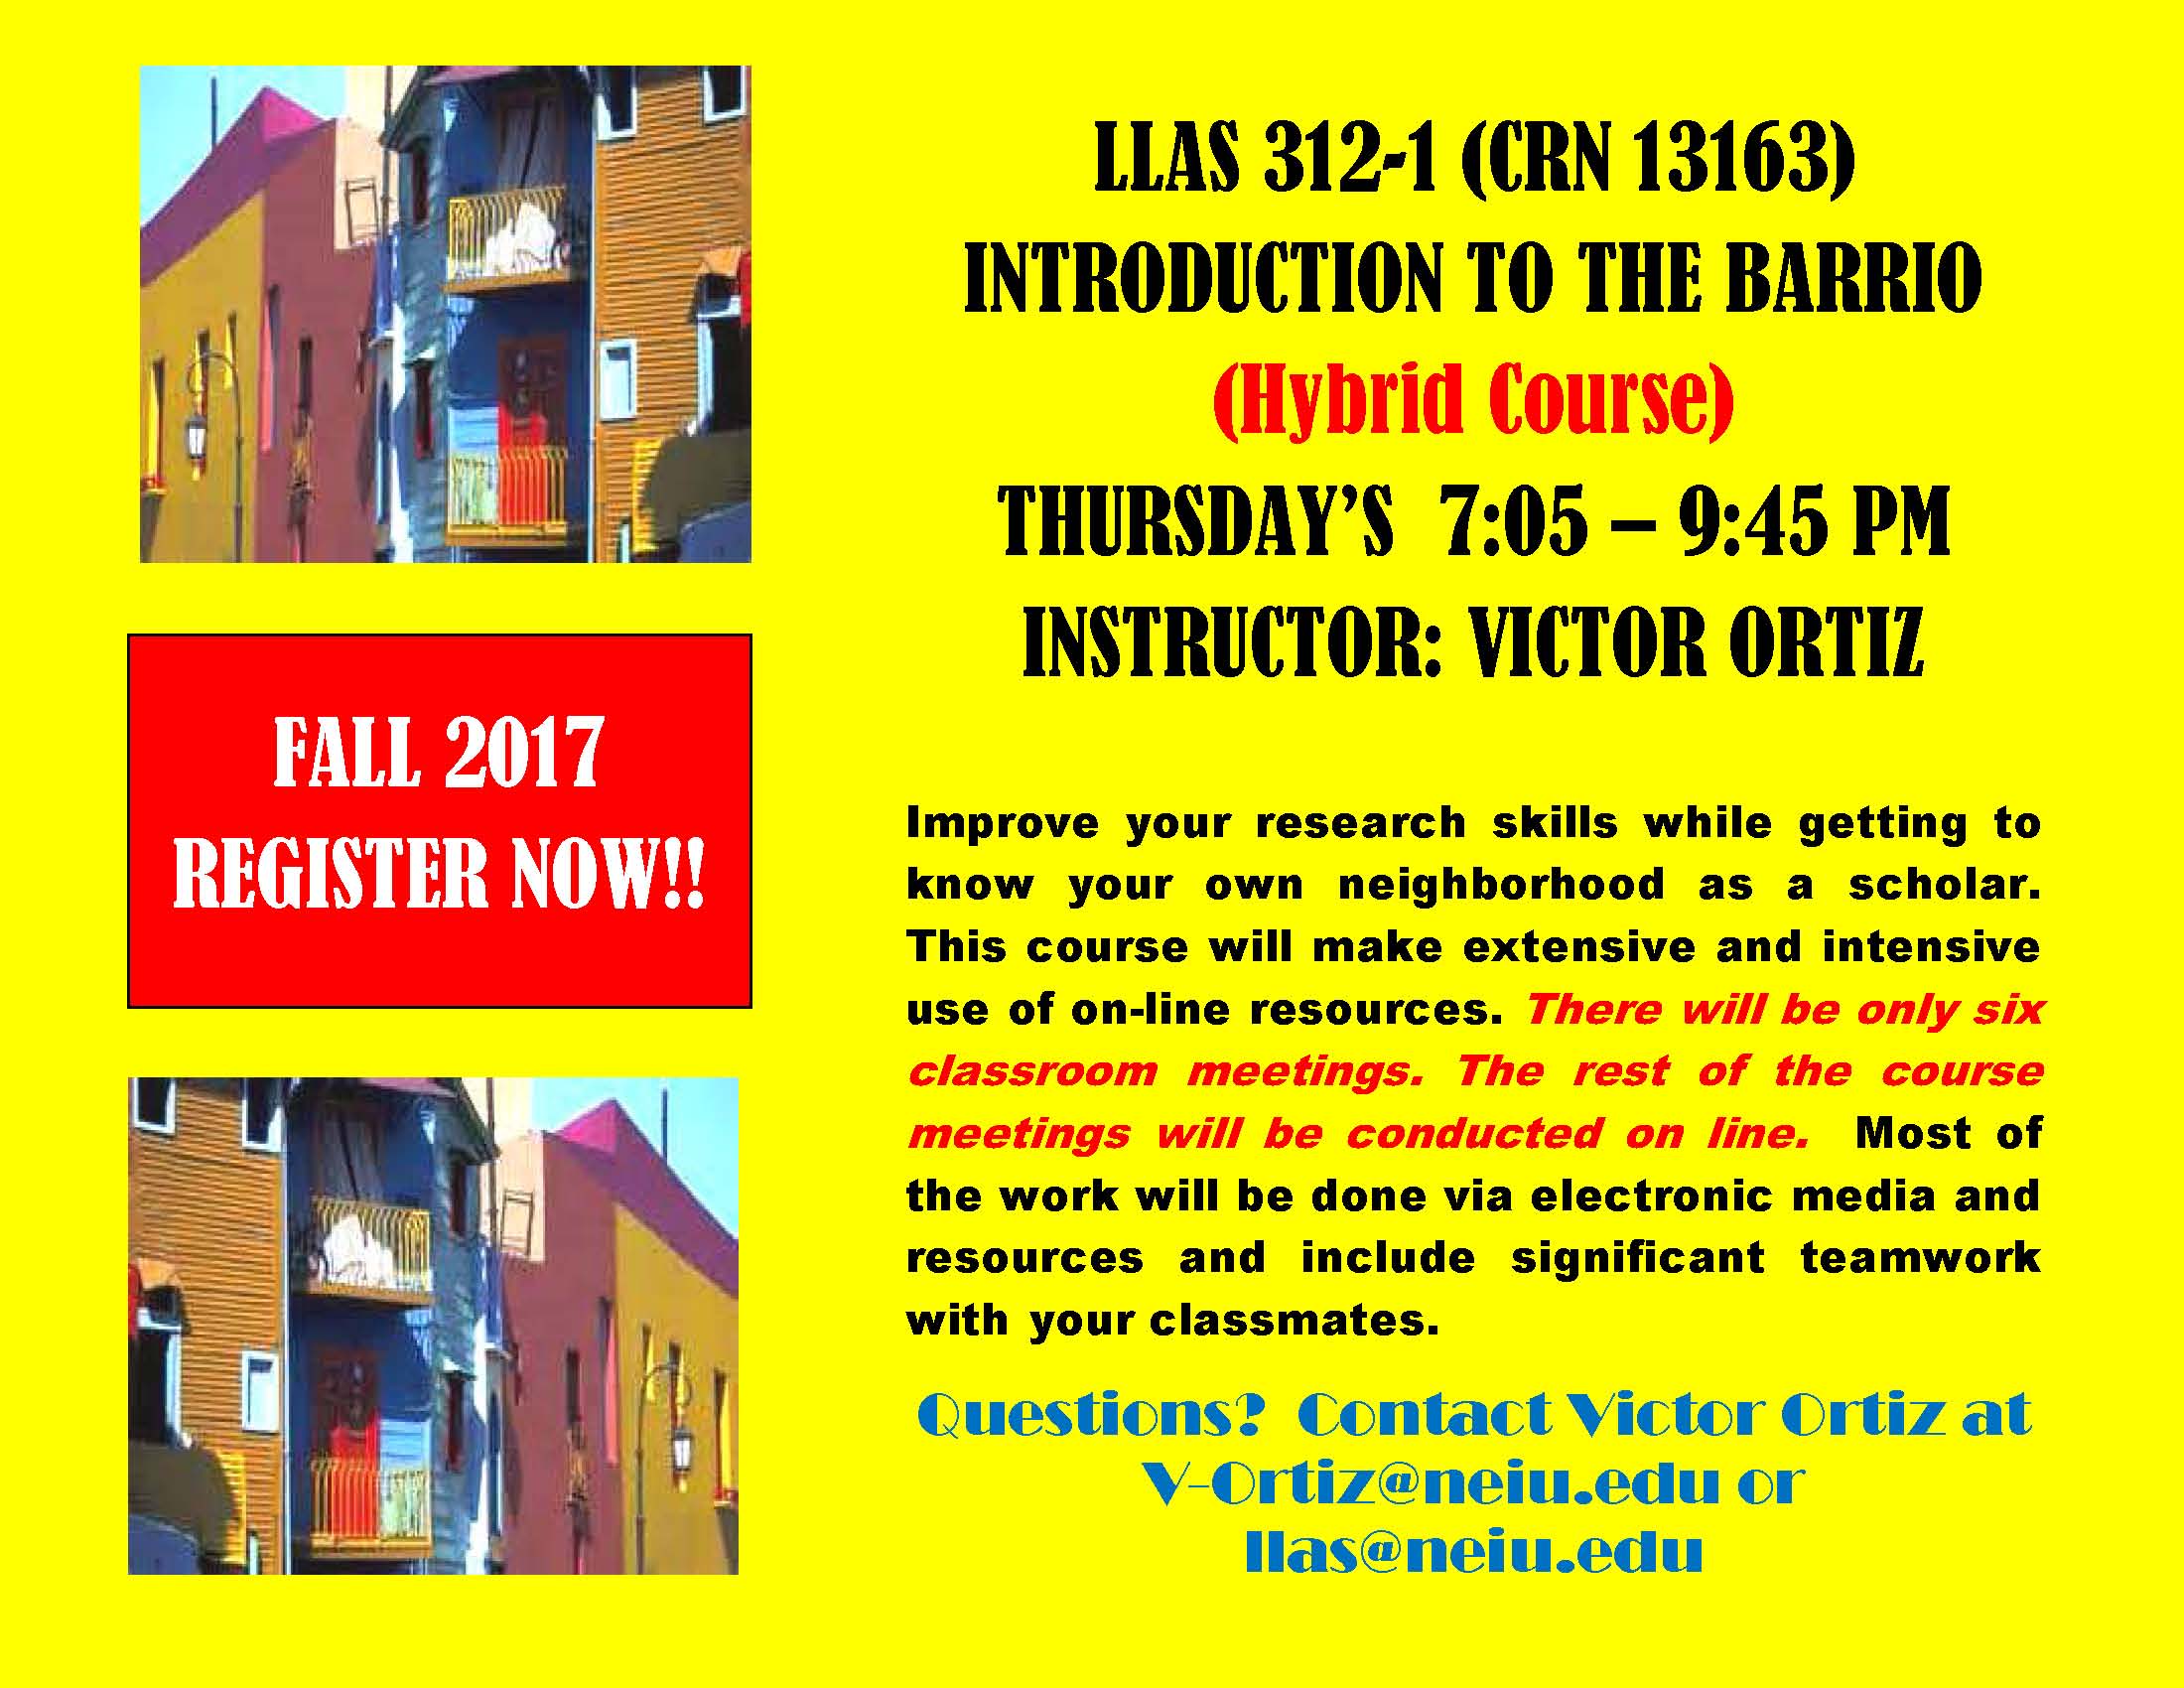 LLAS 312-1 - Introduction to the Barrio